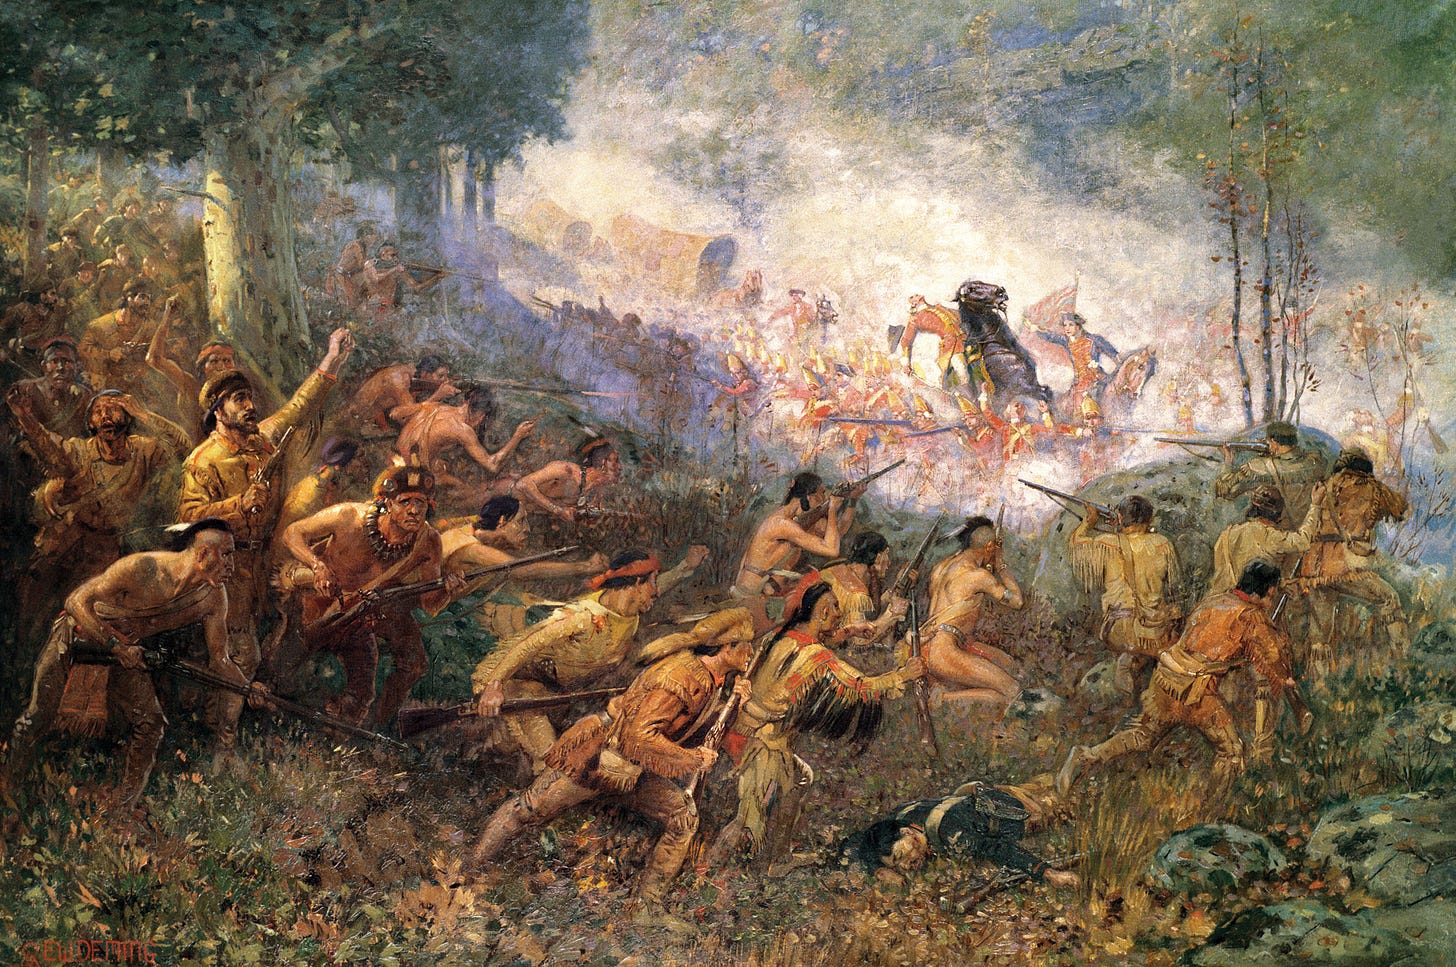 The Battle of the Monongahela: Disaster in the Wilderness